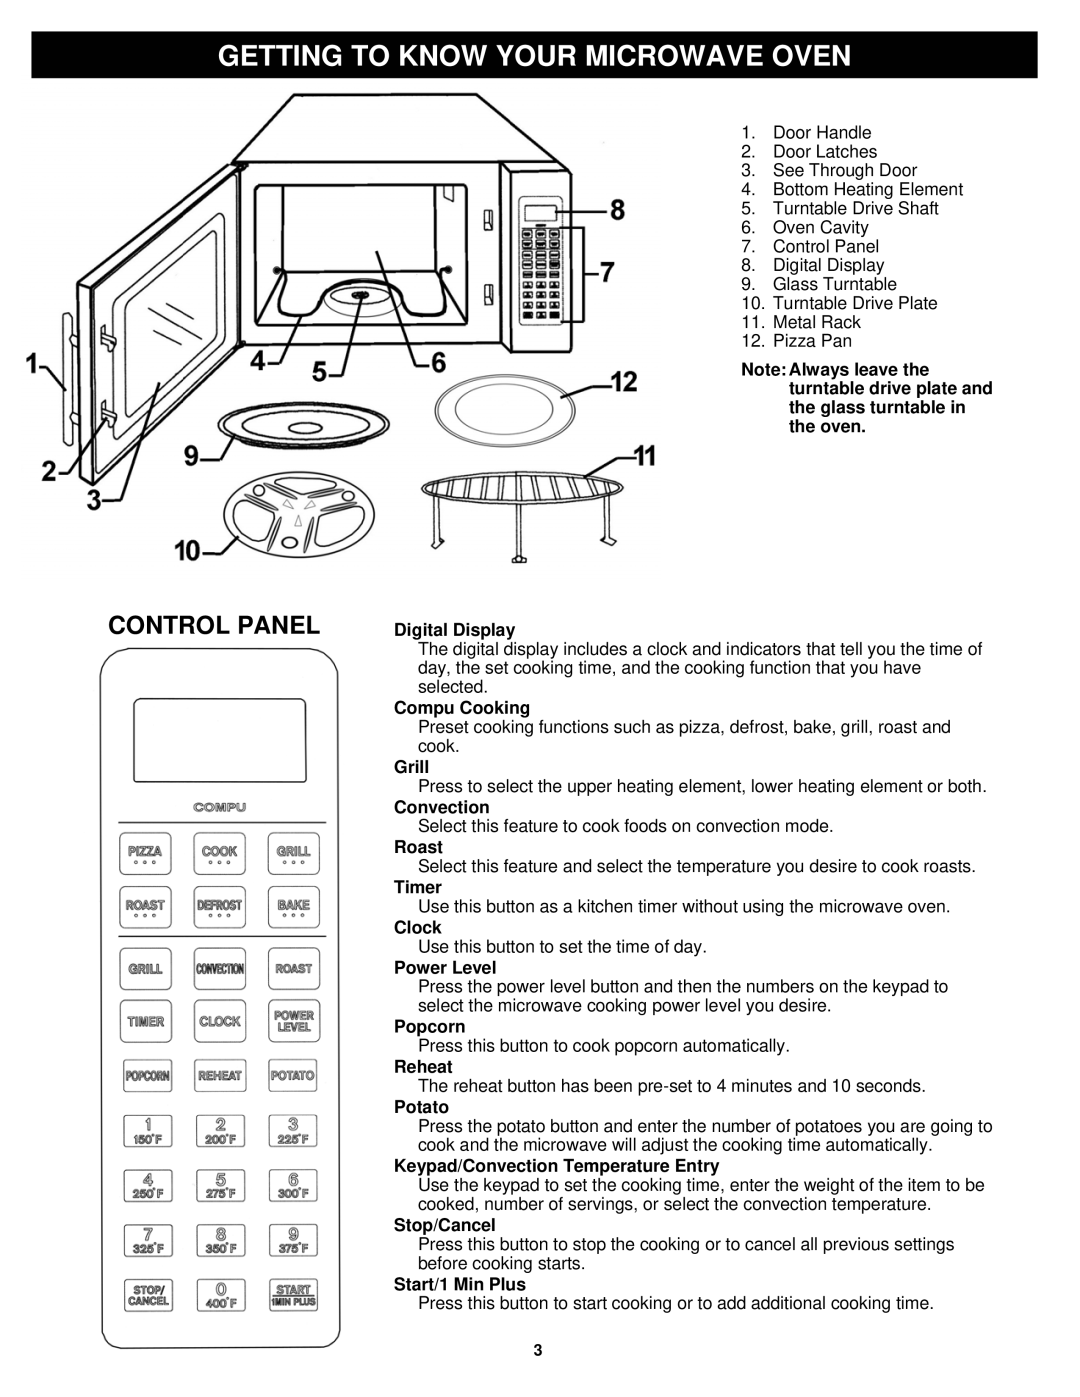 Bravetti K5345H owner manual Getting To Know Your Microwave Oven, Control Panel 